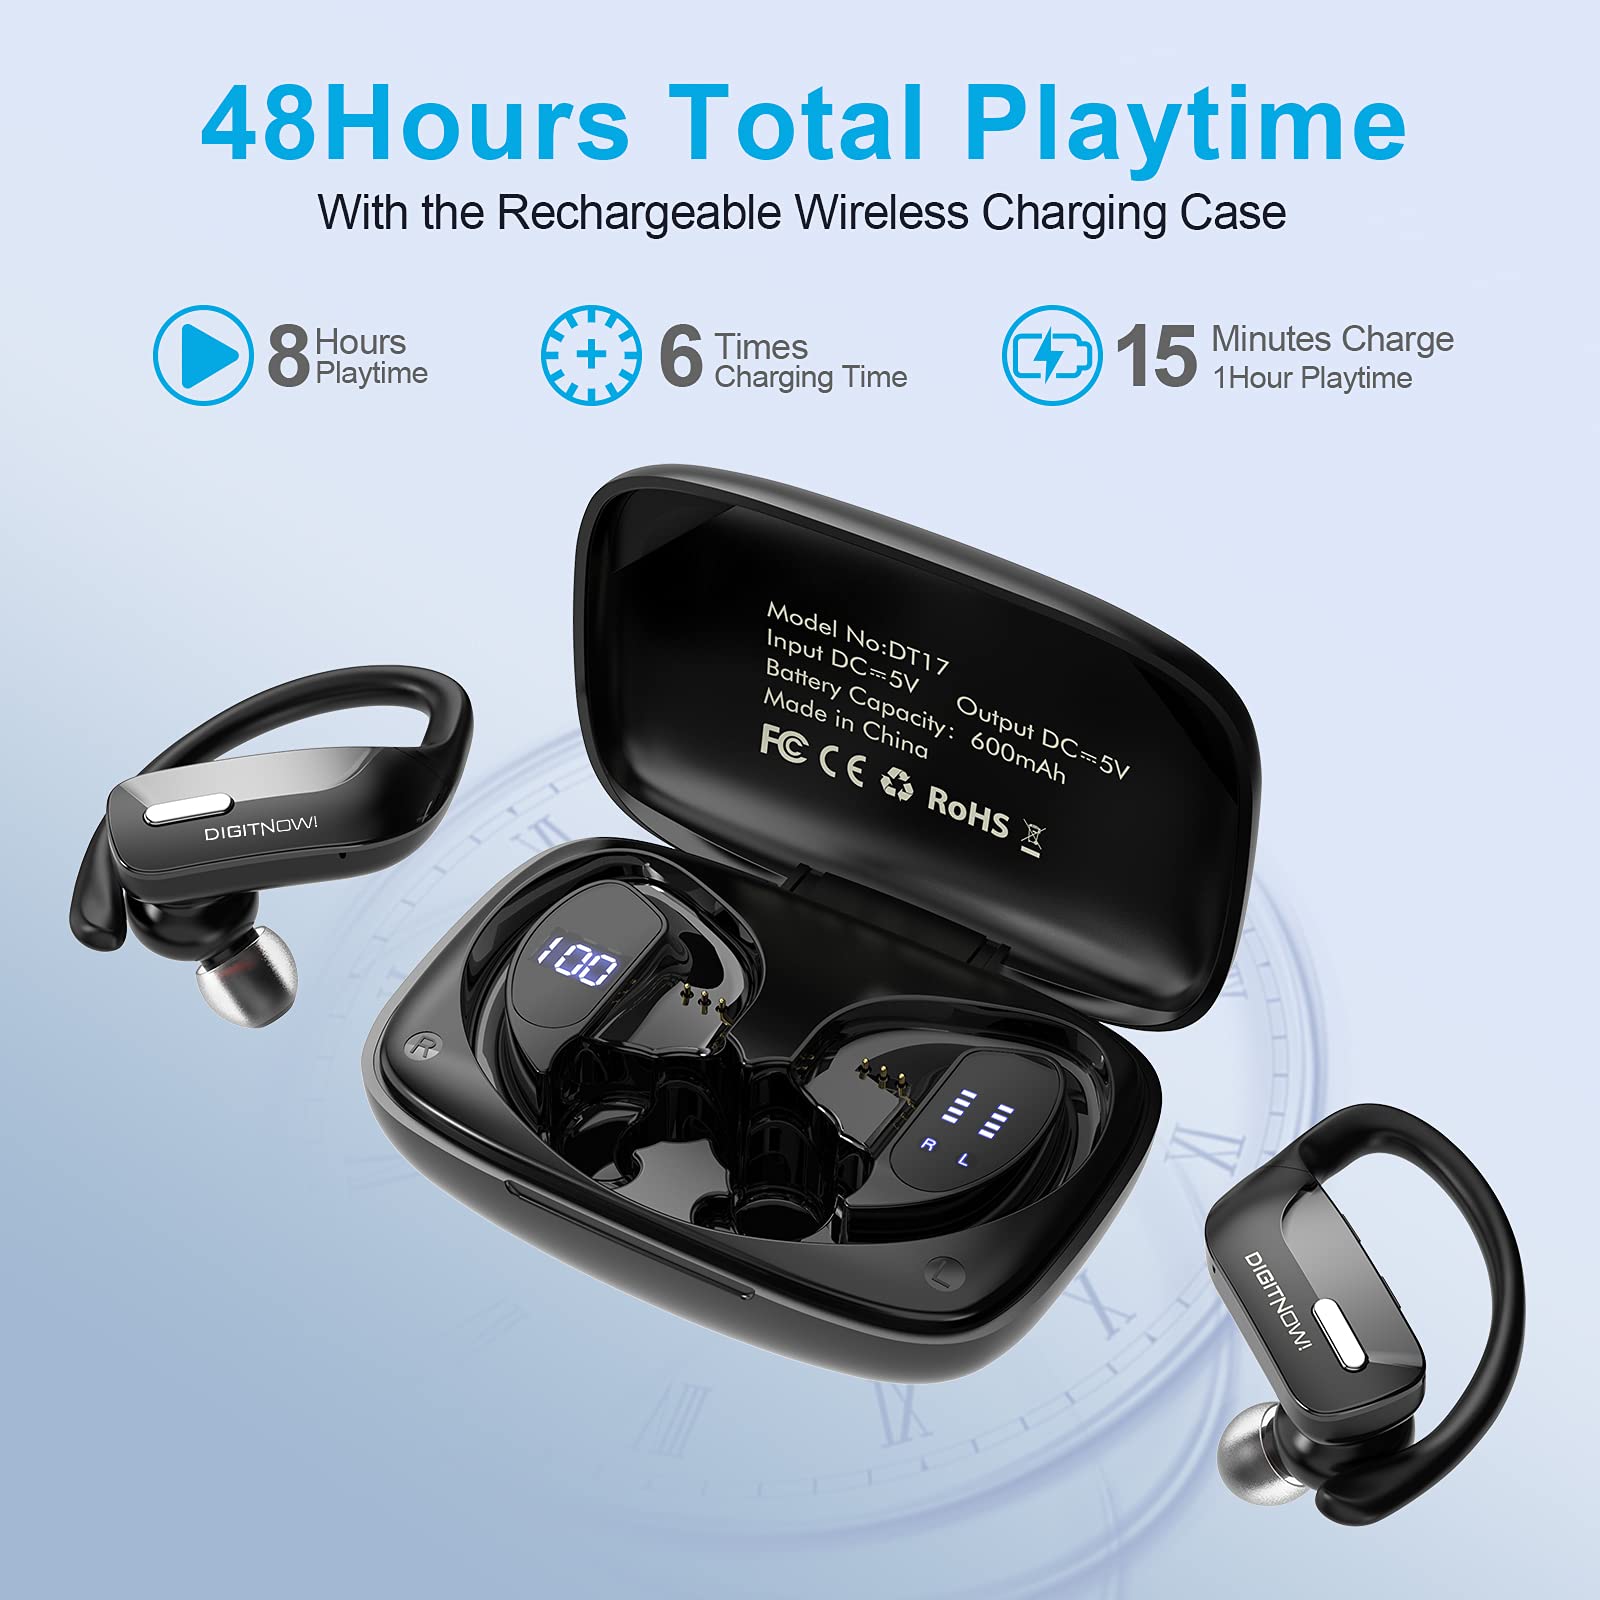 Wireless Earbuds Bluetooth LKLLL 5.0 Headphones 48 Hours Playback Sports Earphones with LED Display Built-in Mic Deep Bass Stereo In-Ear Waterproof Earphones for Exercise Game Running